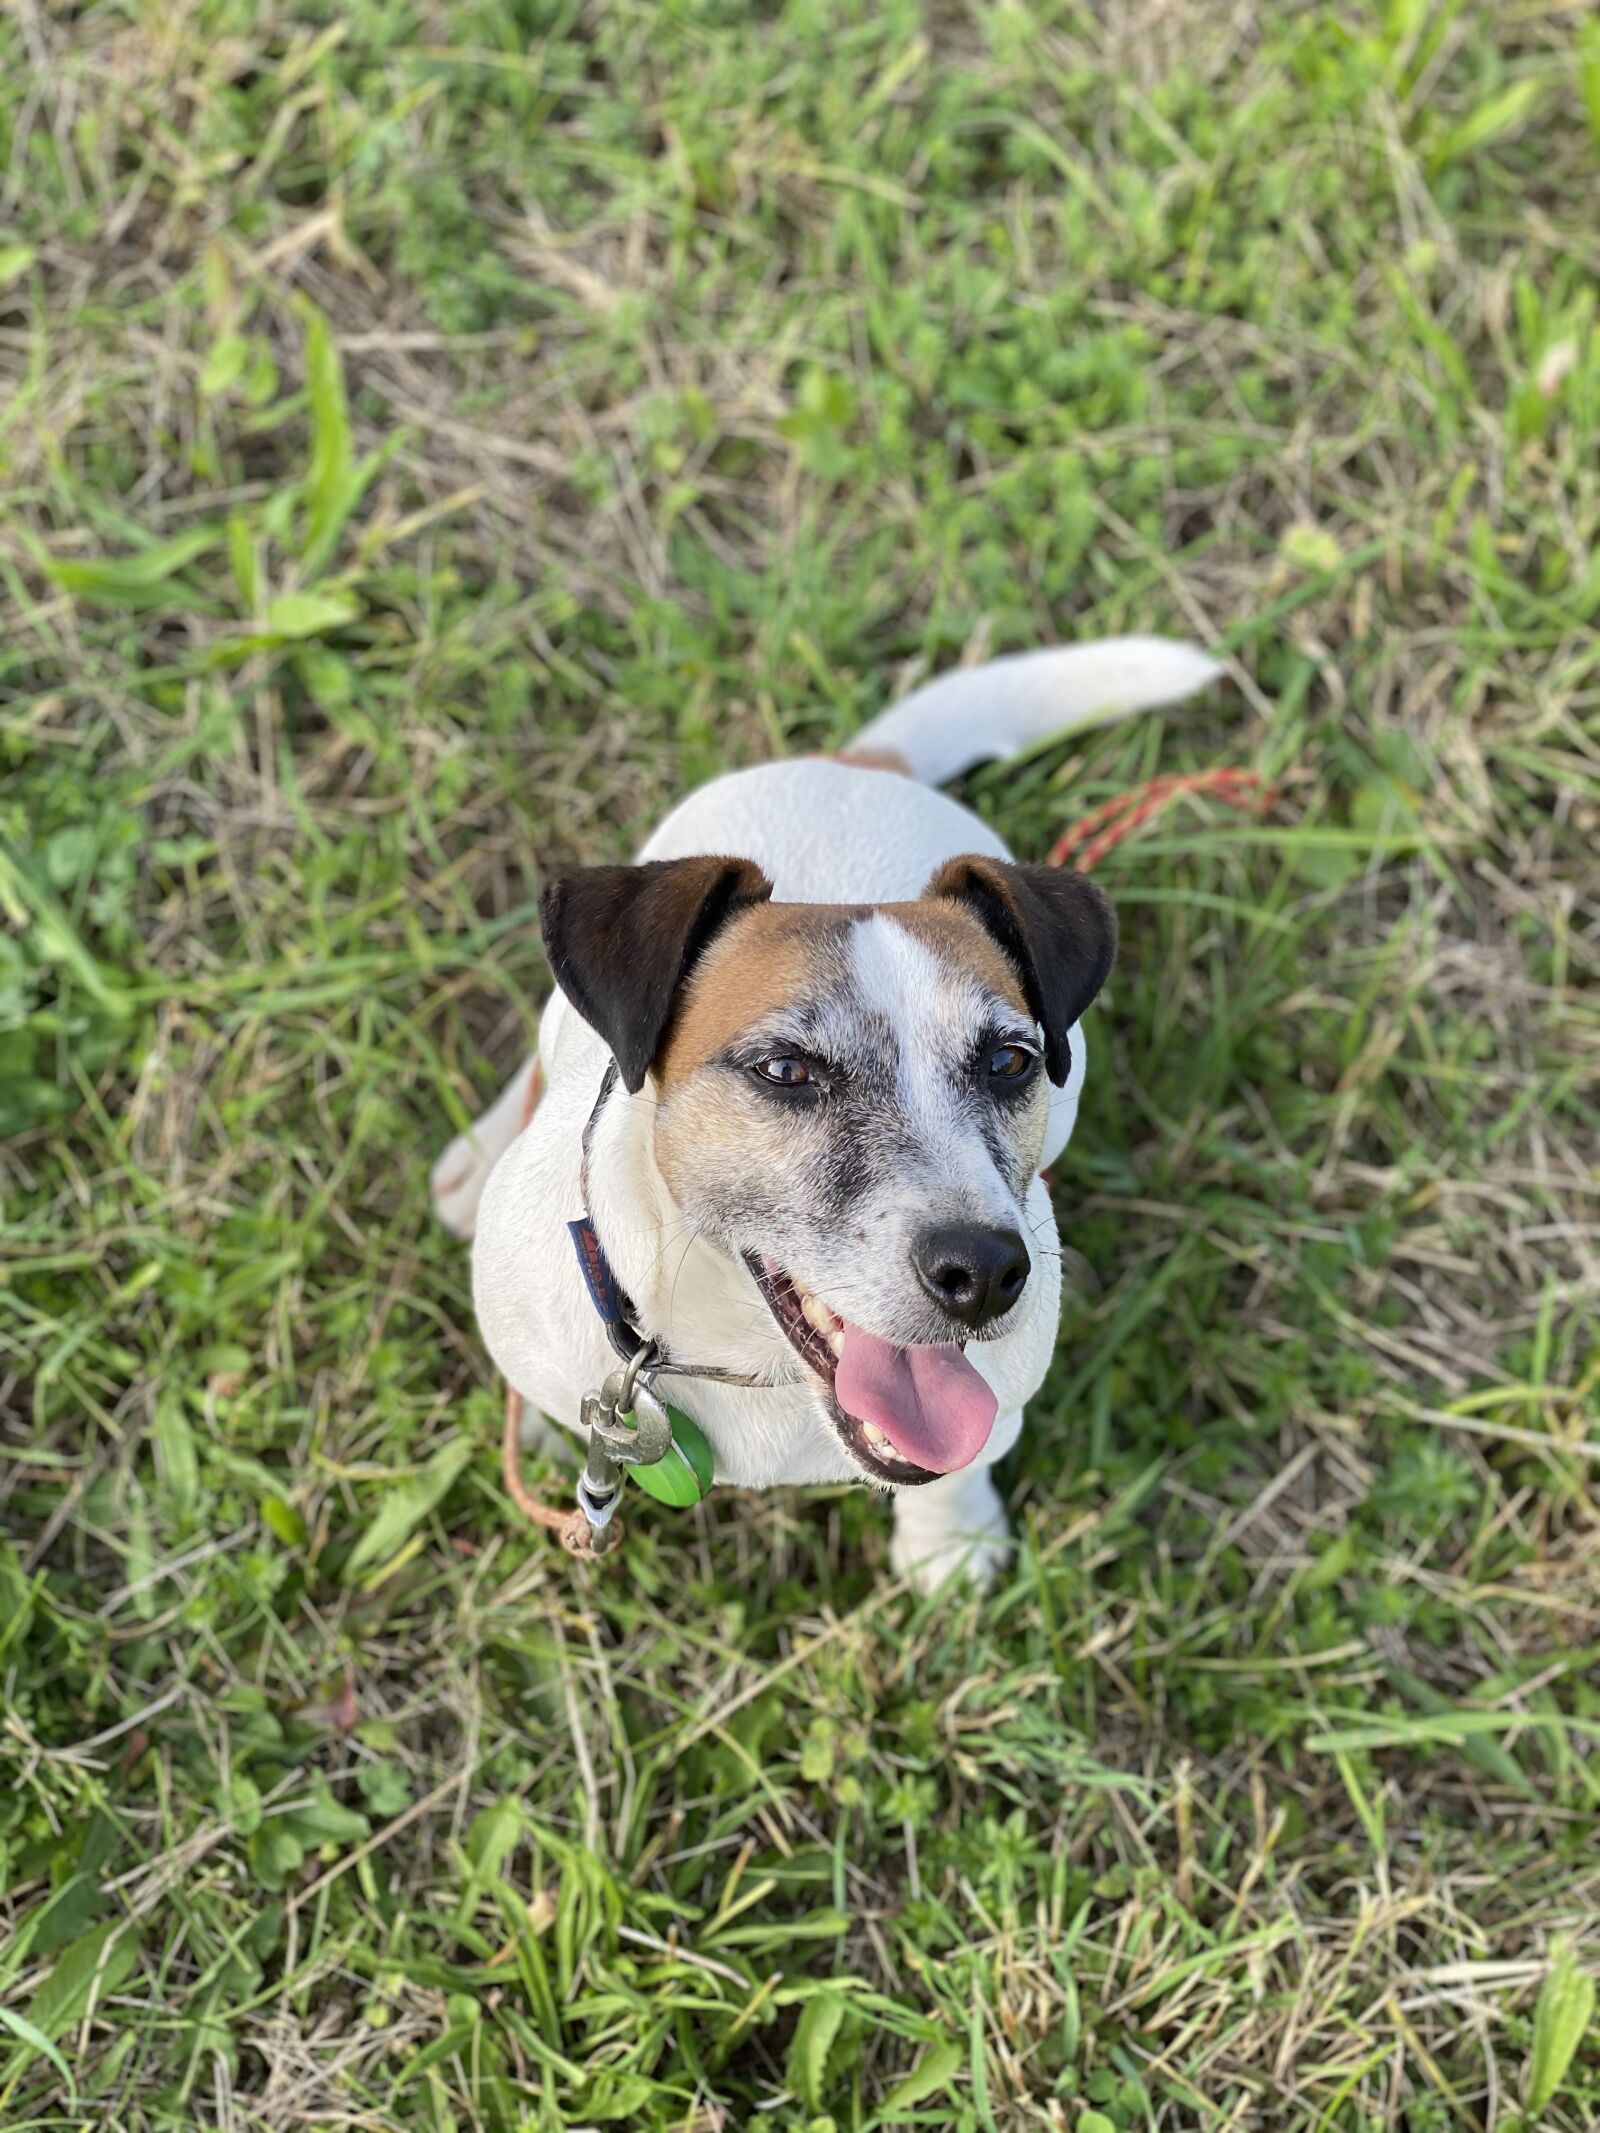 Apple iPhone 11 Pro + iPhone 11 Pro back dual camera 6mm f/2 sample photo. Jack russell terrier, dog photography